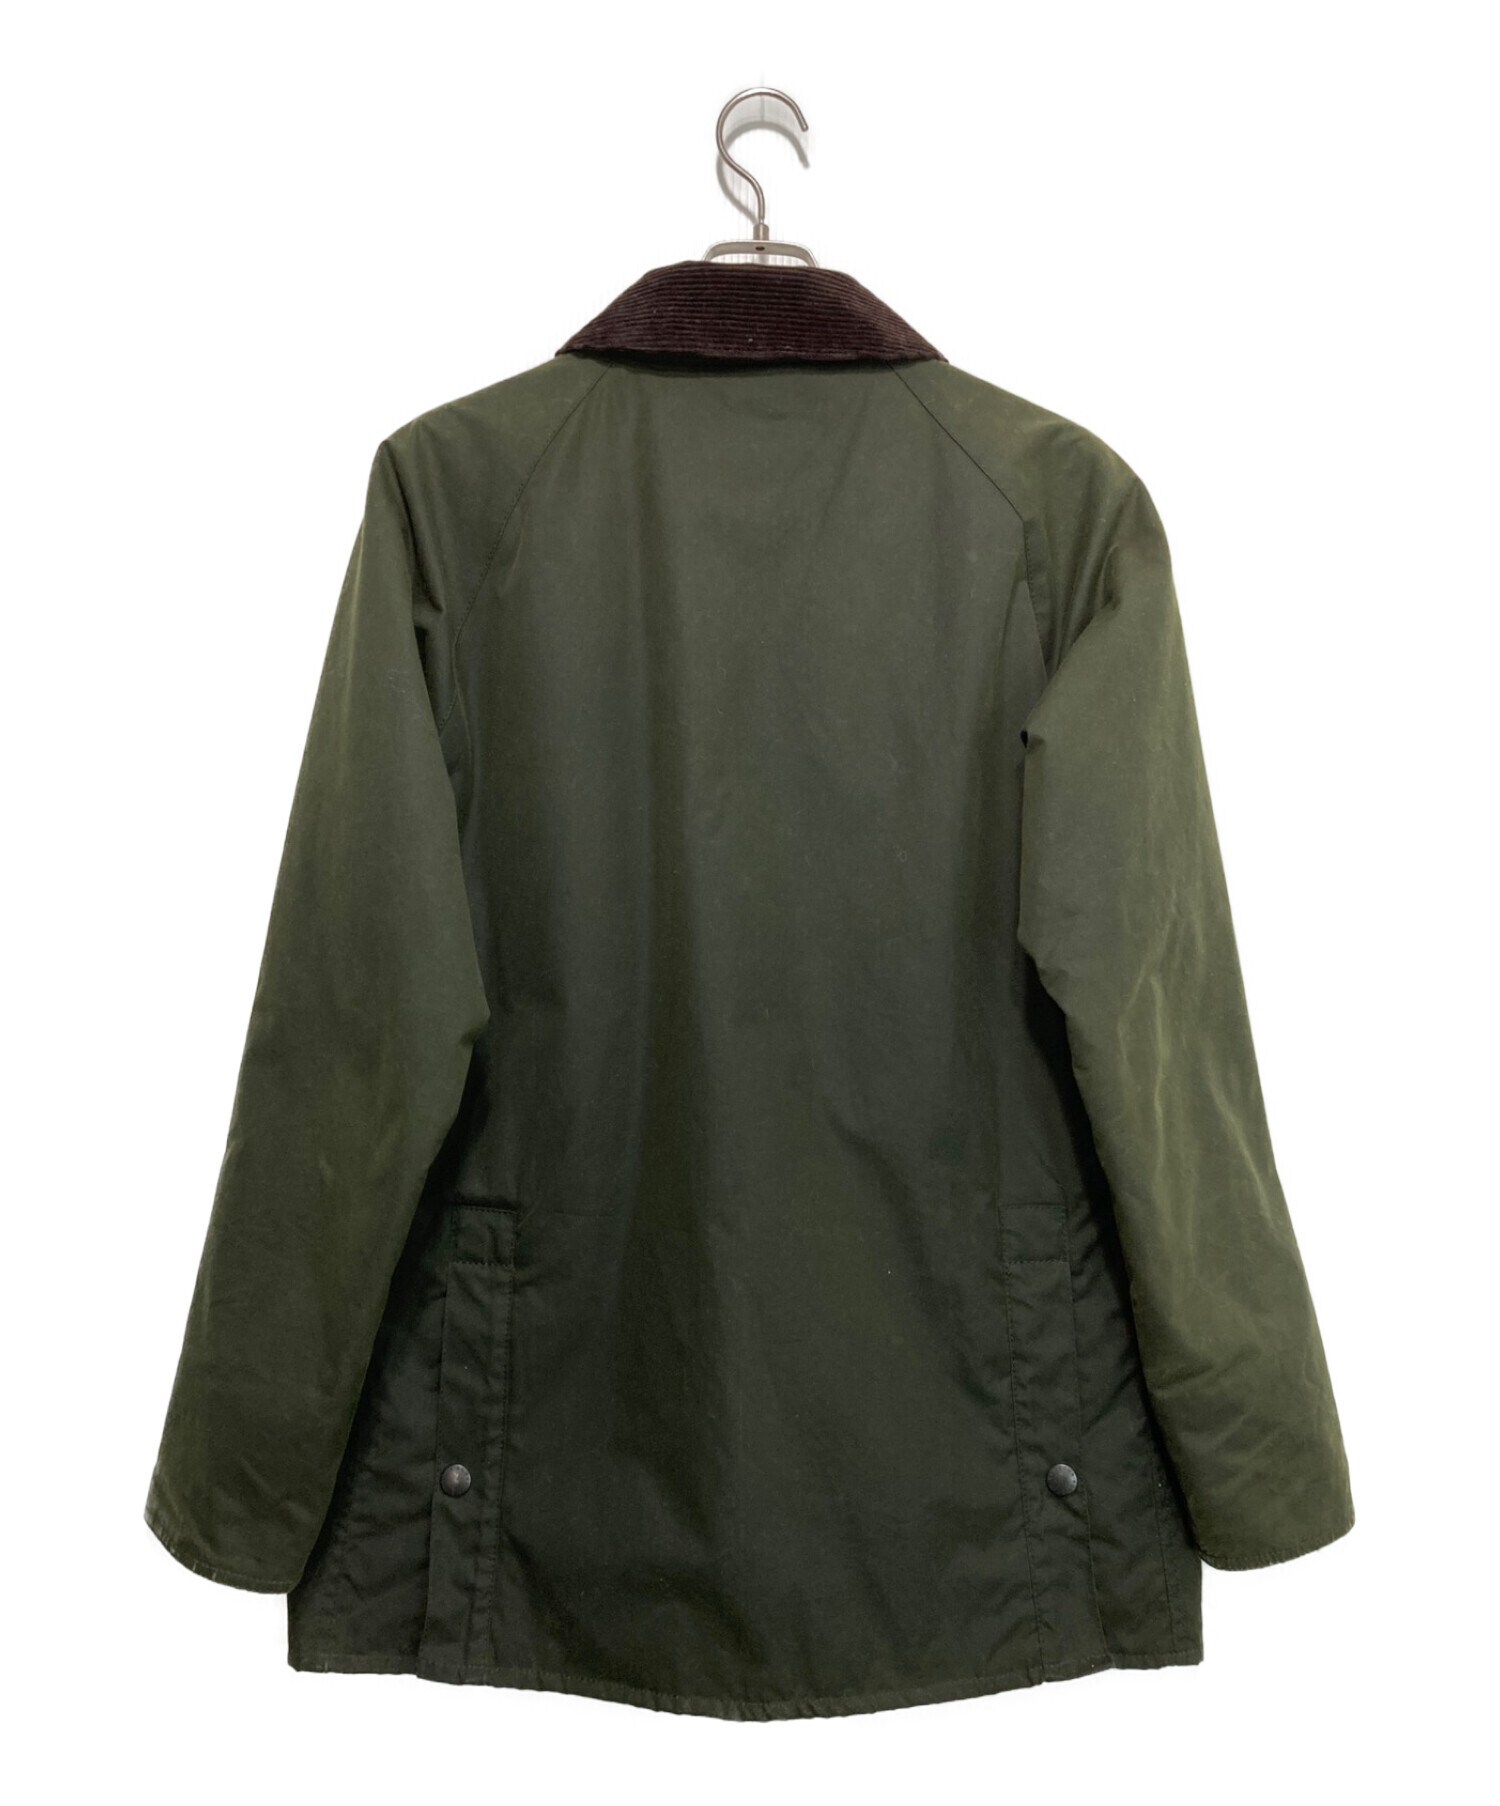 Barbour (バブアー) BEDALE SL PILE LINING グリーン サイズ:40